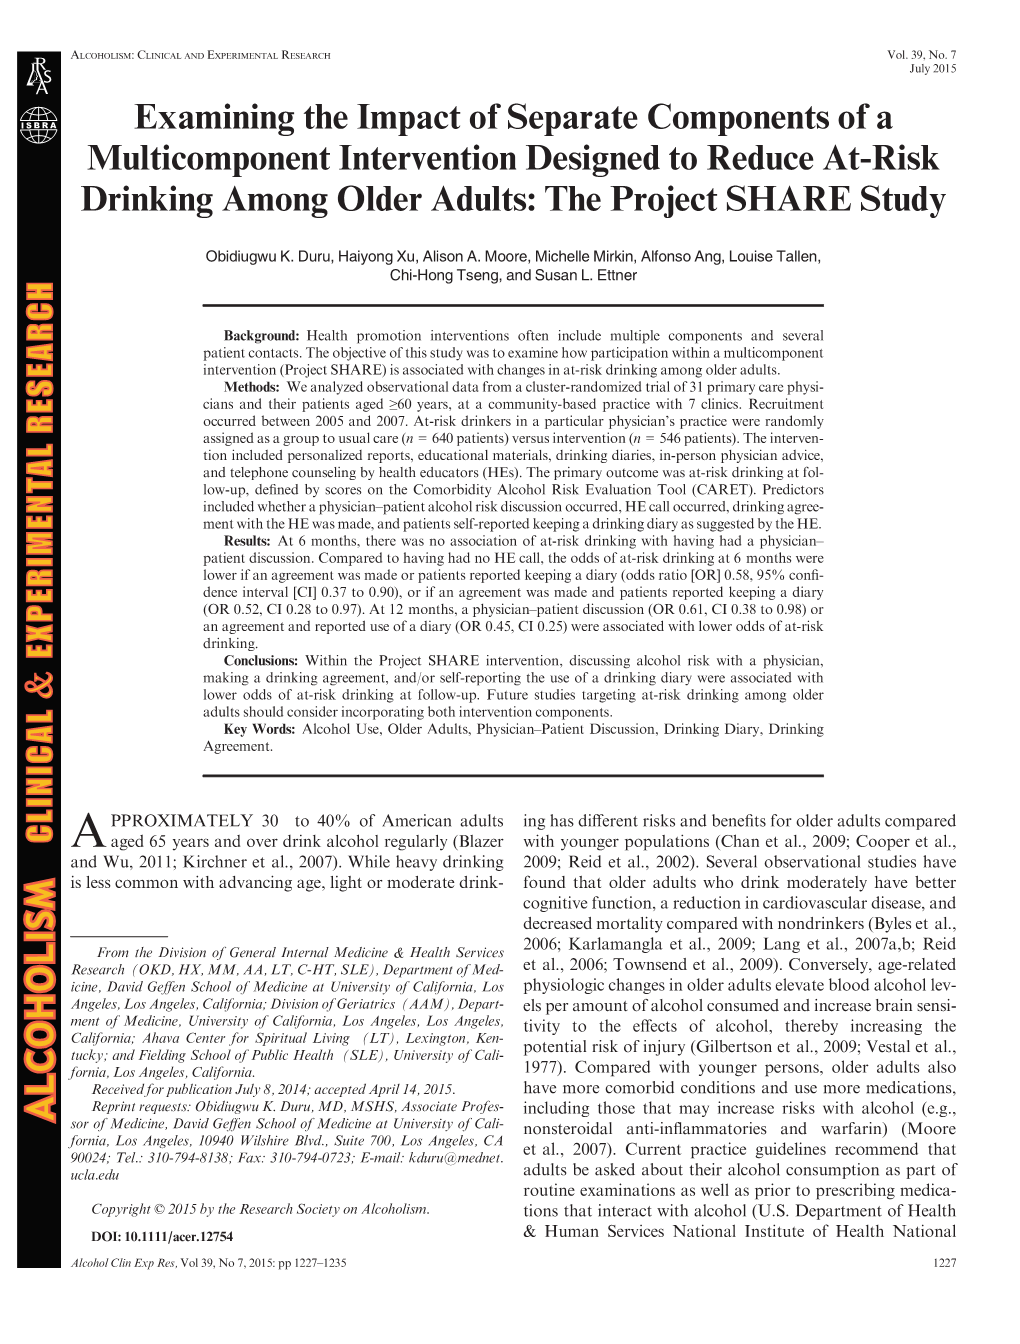 Risk Drinking Among Older Adults: the Project SHARE Study